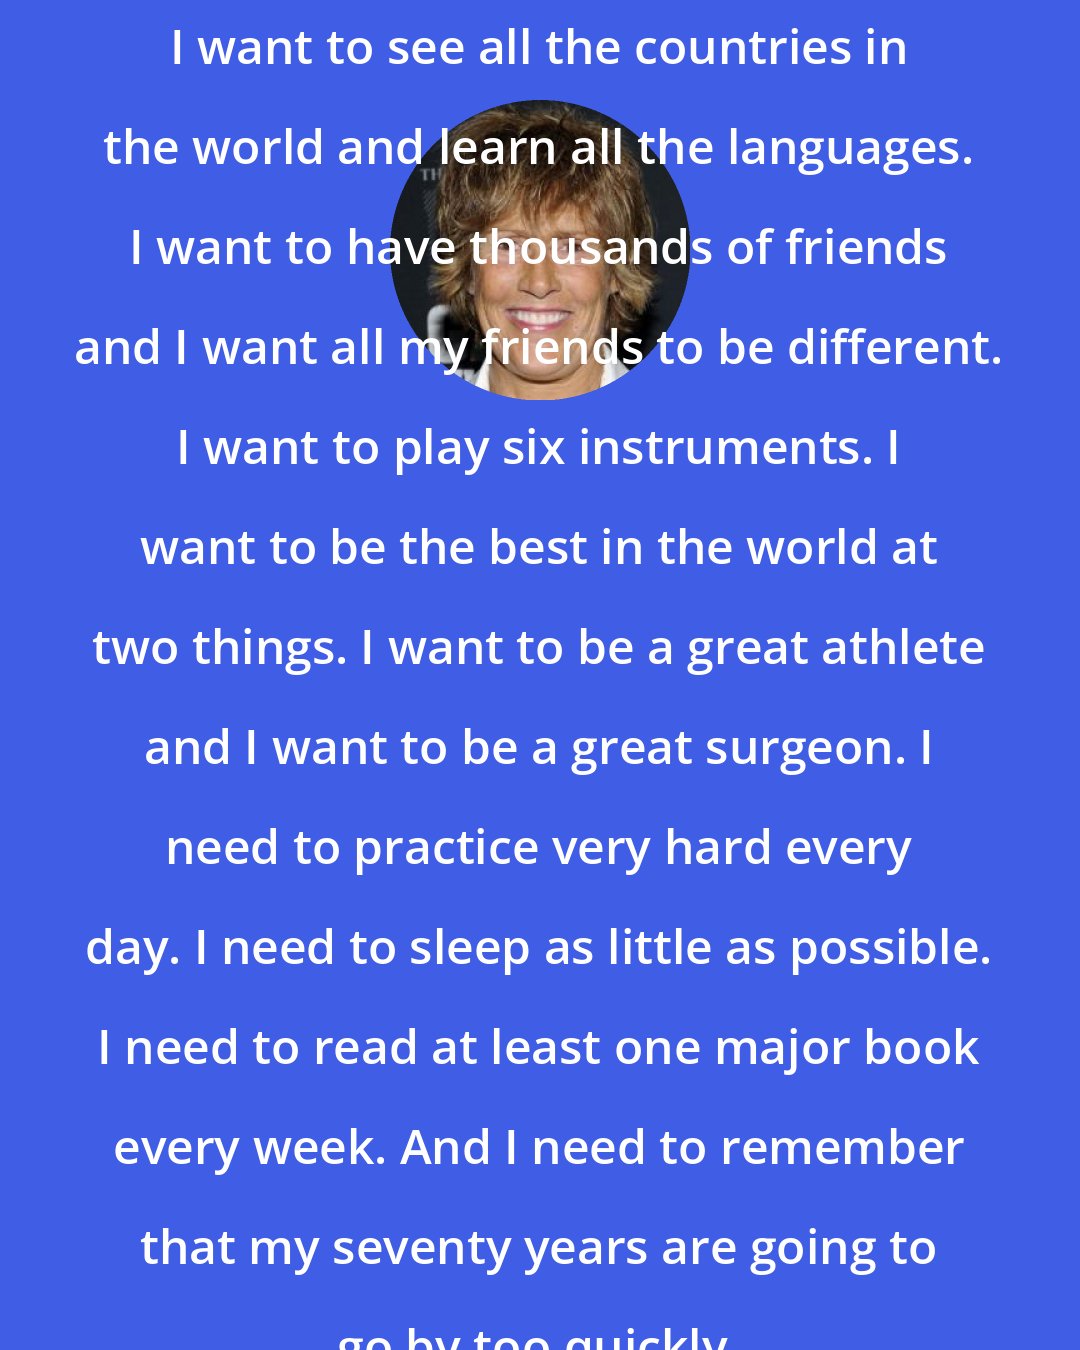 Diana Nyad: I want to see all the countries in the world and learn all the languages. I want to have thousands of friends and I want all my friends to be different. I want to play six instruments. I want to be the best in the world at two things. I want to be a great athlete and I want to be a great surgeon. I need to practice very hard every day. I need to sleep as little as possible. I need to read at least one major book every week. And I need to remember that my seventy years are going to go by too quickly.